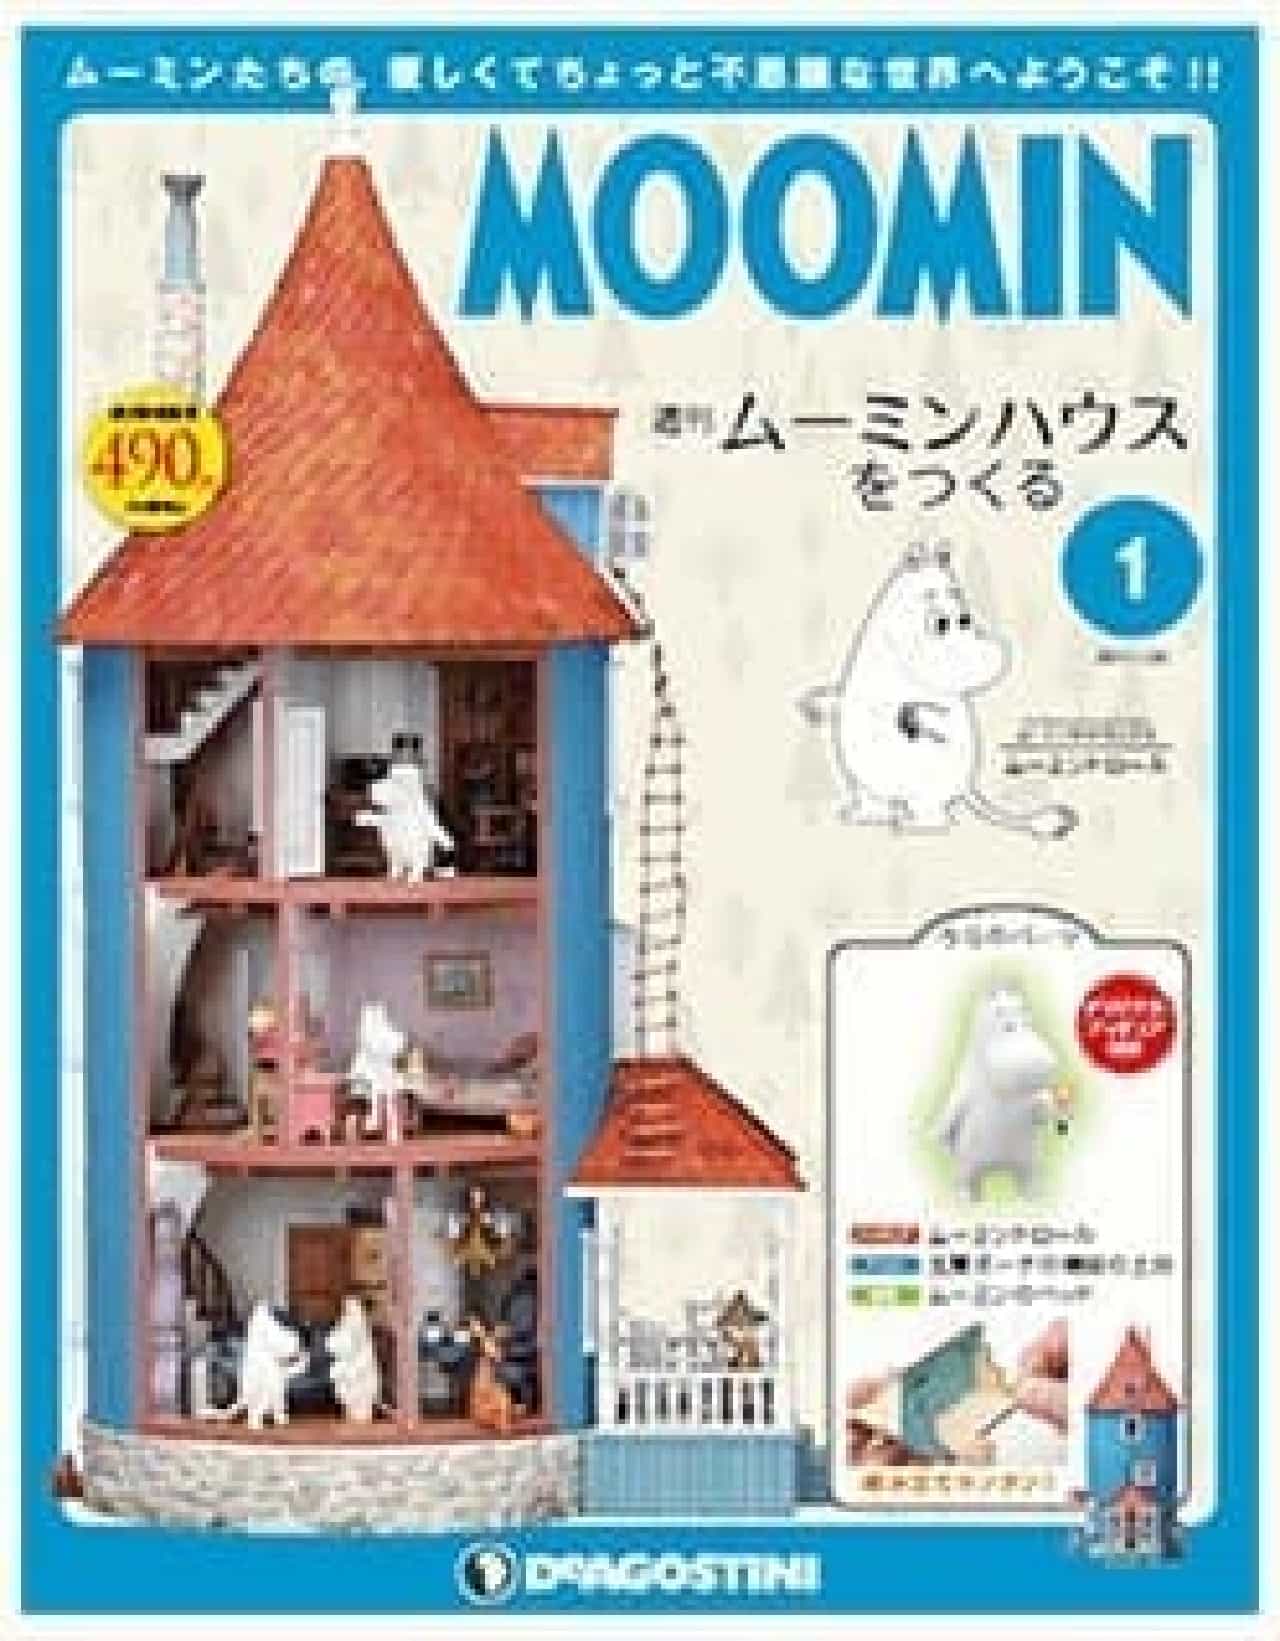 Assembly magazine with parts "Weekly Moominhouse"